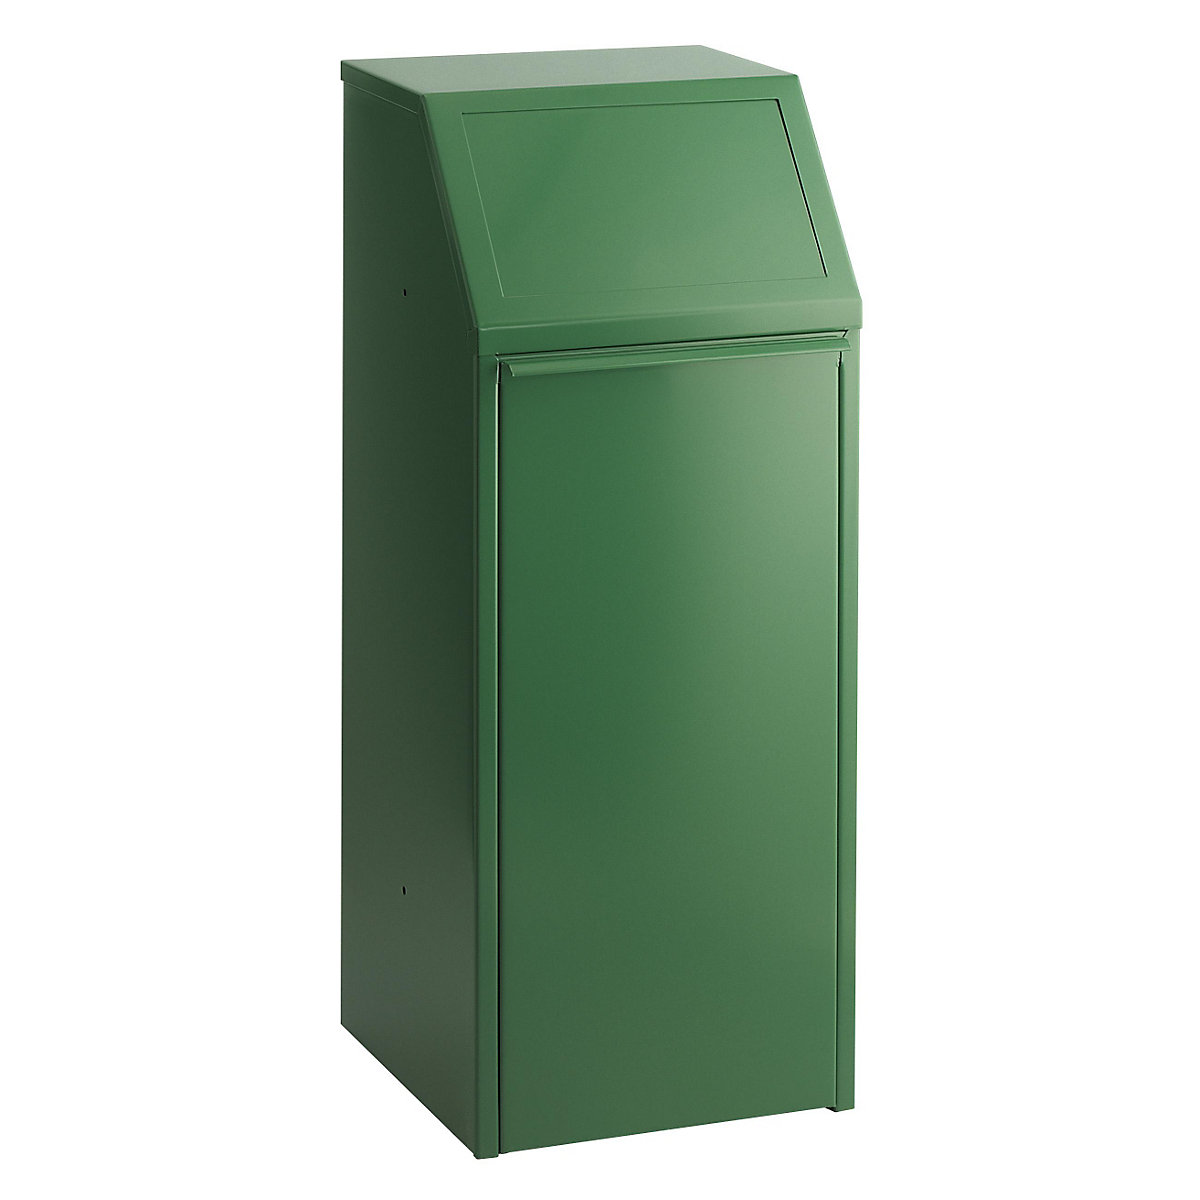 Sheet steel recyclable waste collector, capacity 70 l, WxHxD 408 x 1007 x 405 mm, green-5